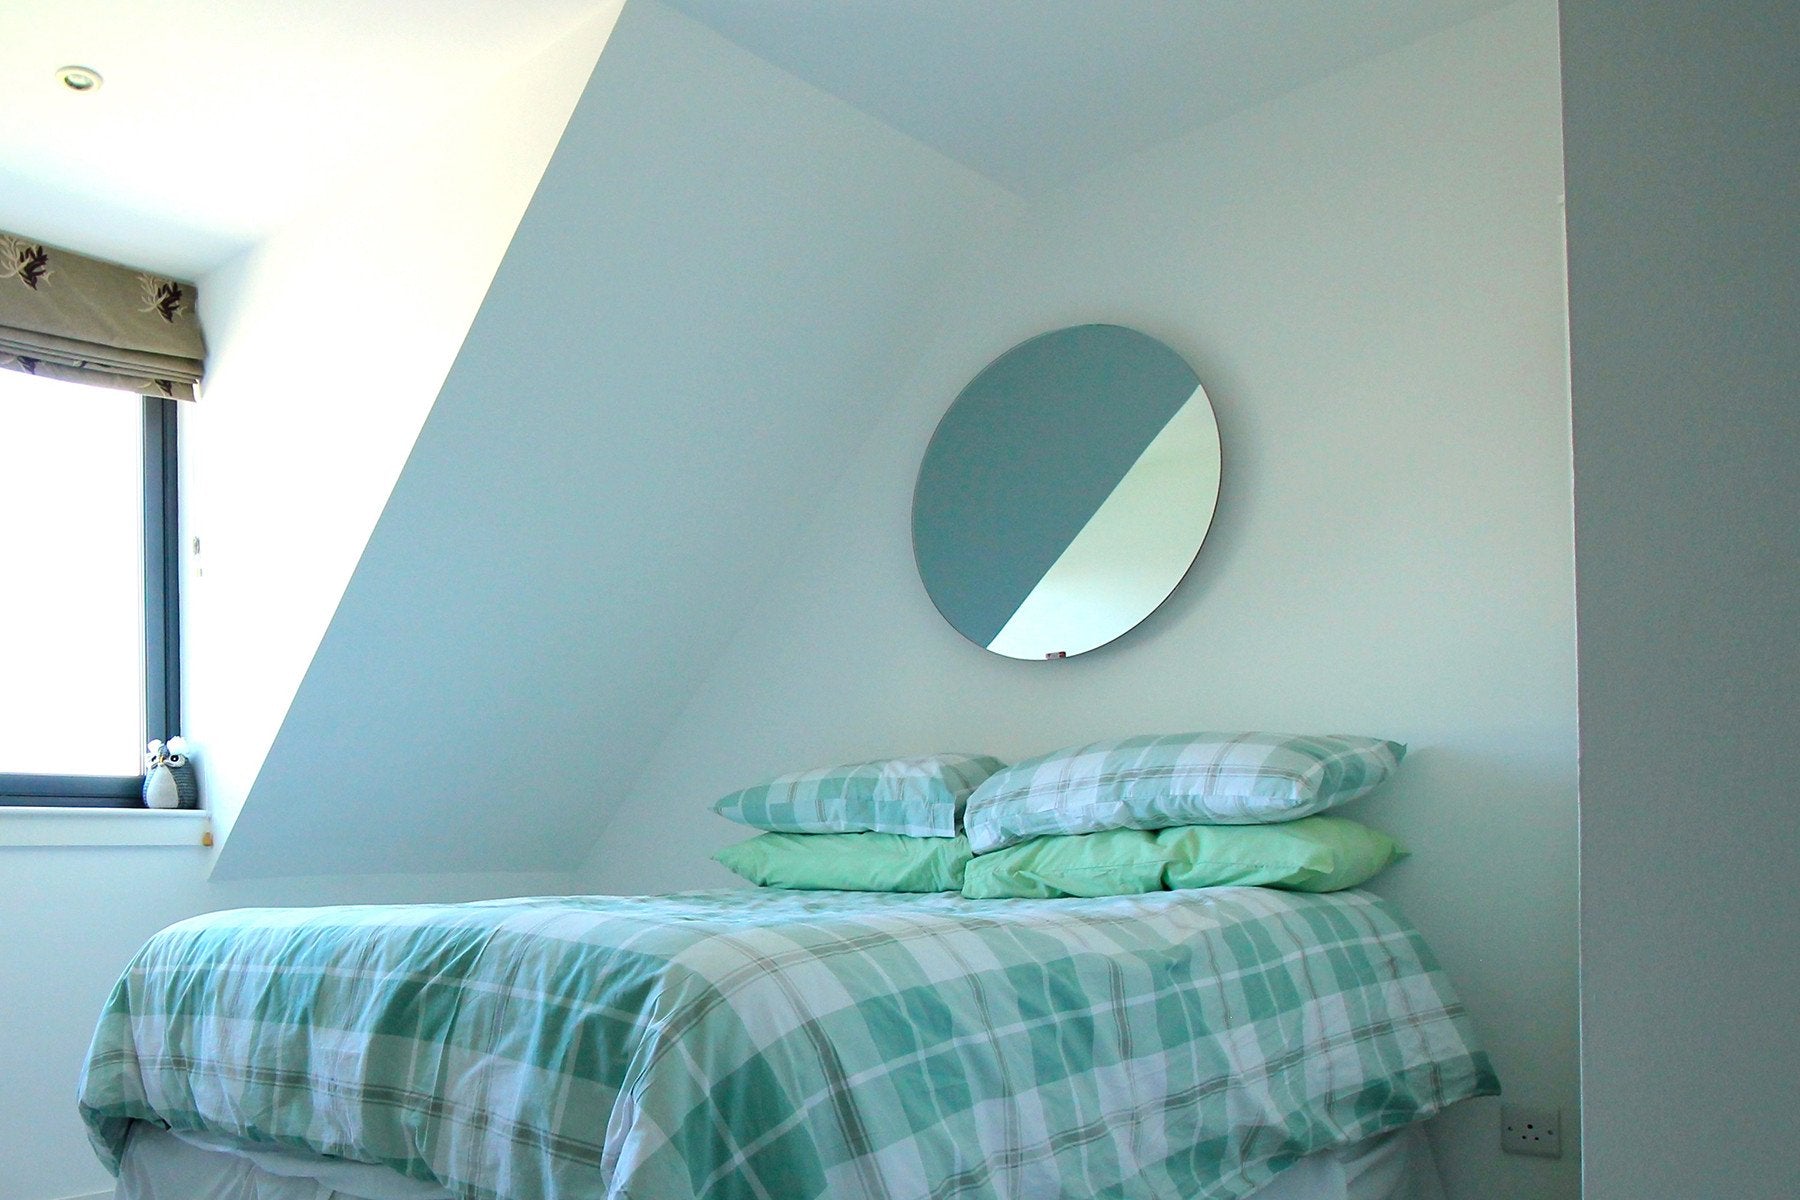 Redwell Infrared Heater Mirror in a Bedroom